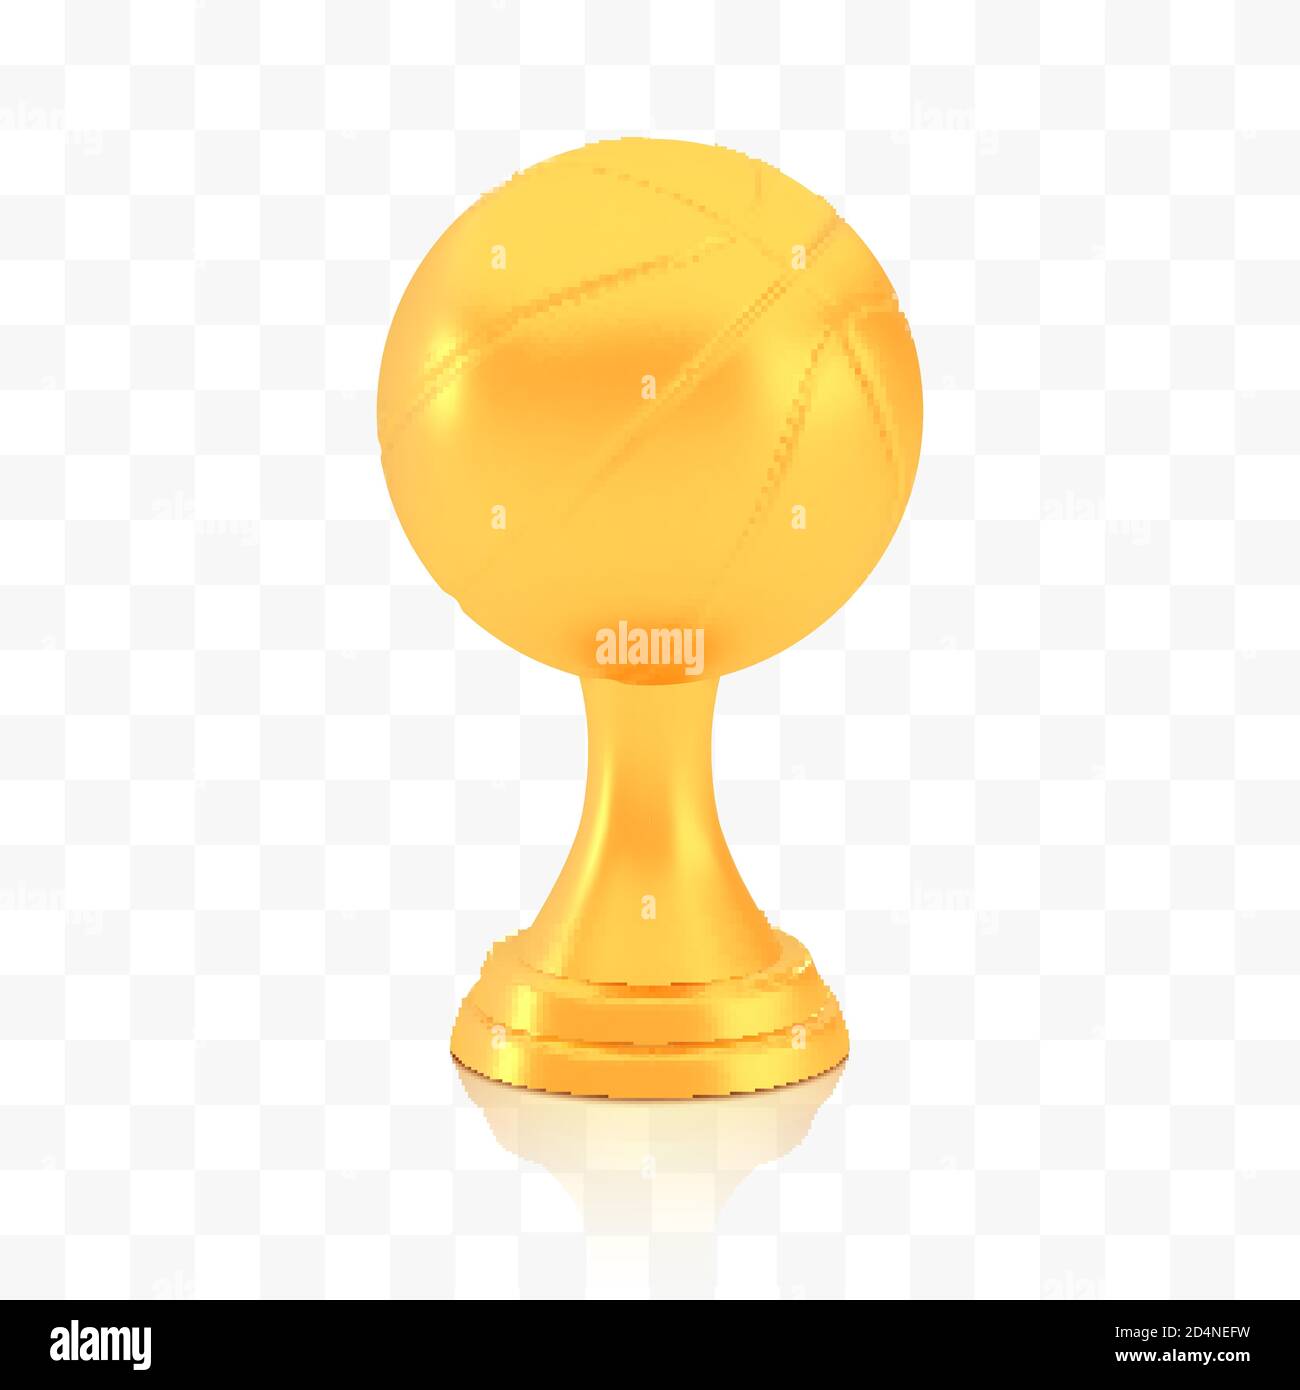 Nba championship trophy Stock Vector Images - Alamy